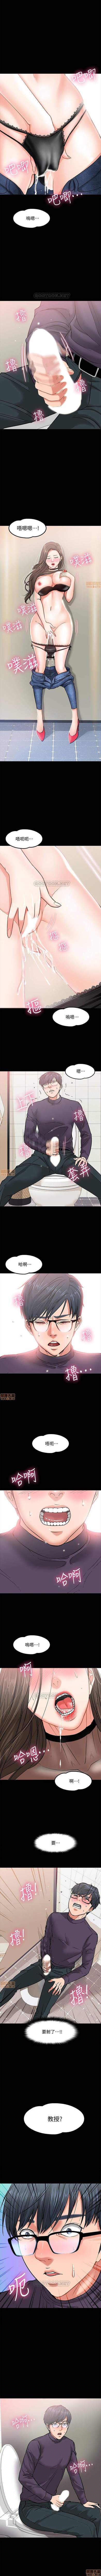 Bunda Grande PROFESSOR, ARE YOU JUST GOING TO LOOK AT ME? | DESIRE SWAMP | 教授，你還等什麼? Ch. 3 [Chinese] Manhwa Leather - Page 7